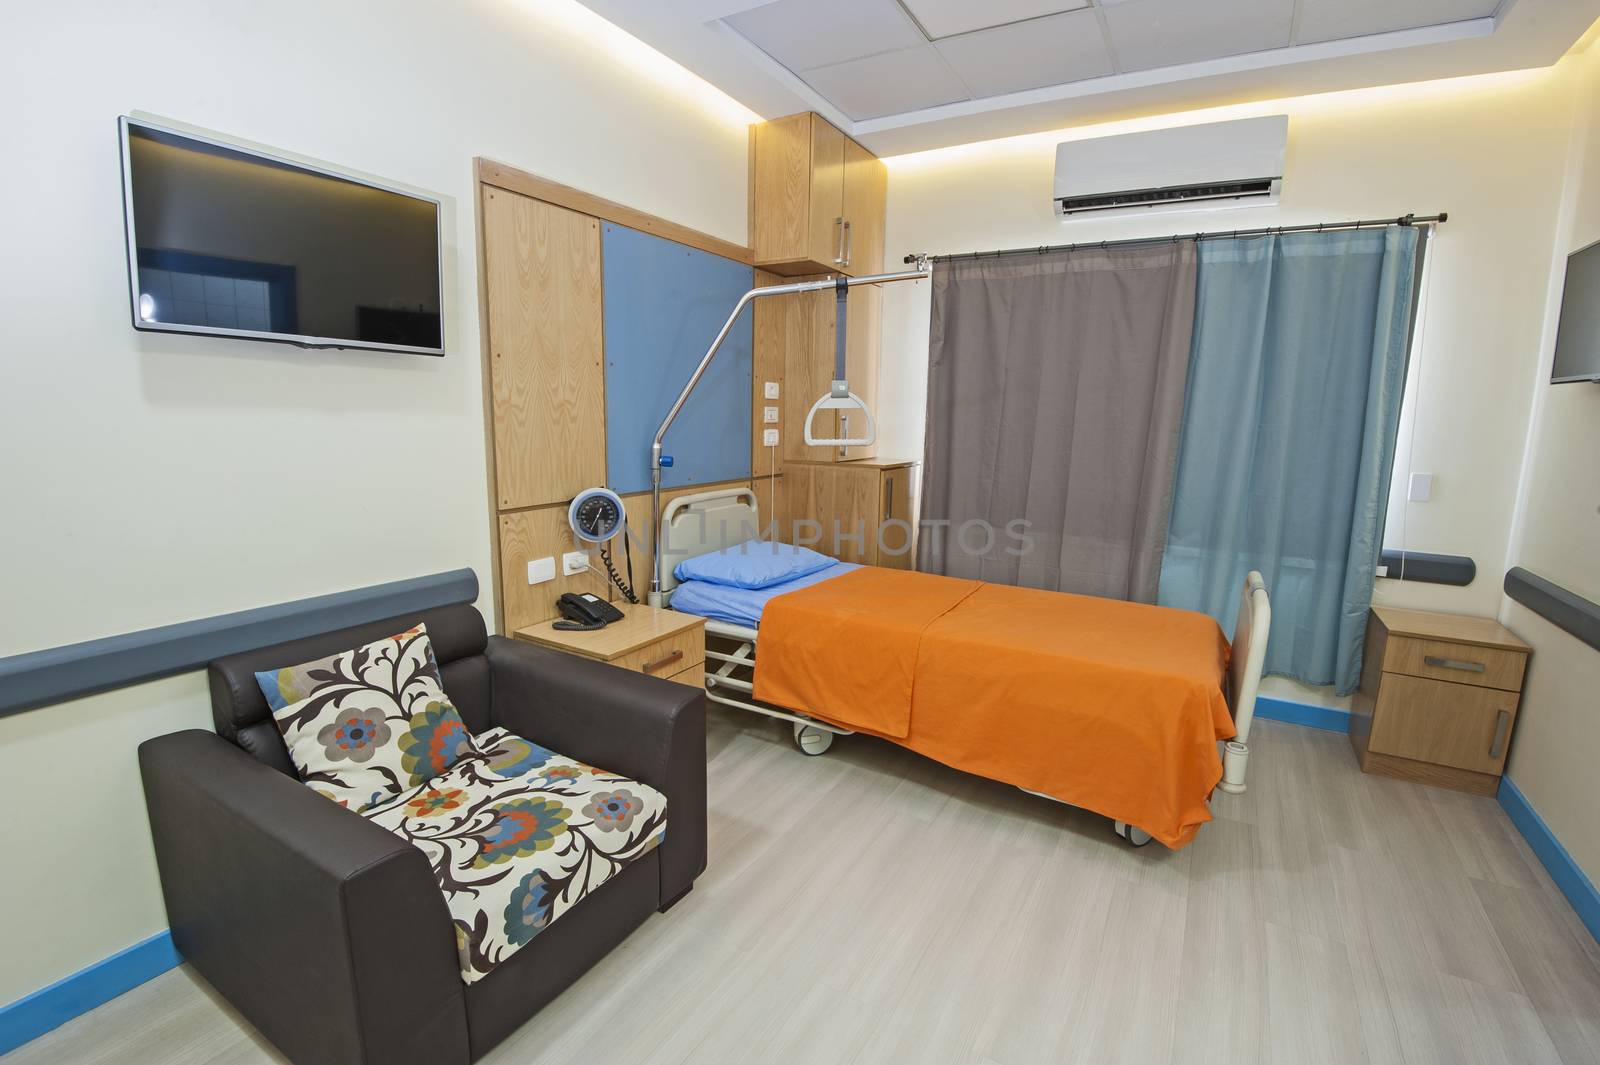 Interior design of a private ward room in hospital medical clinic center